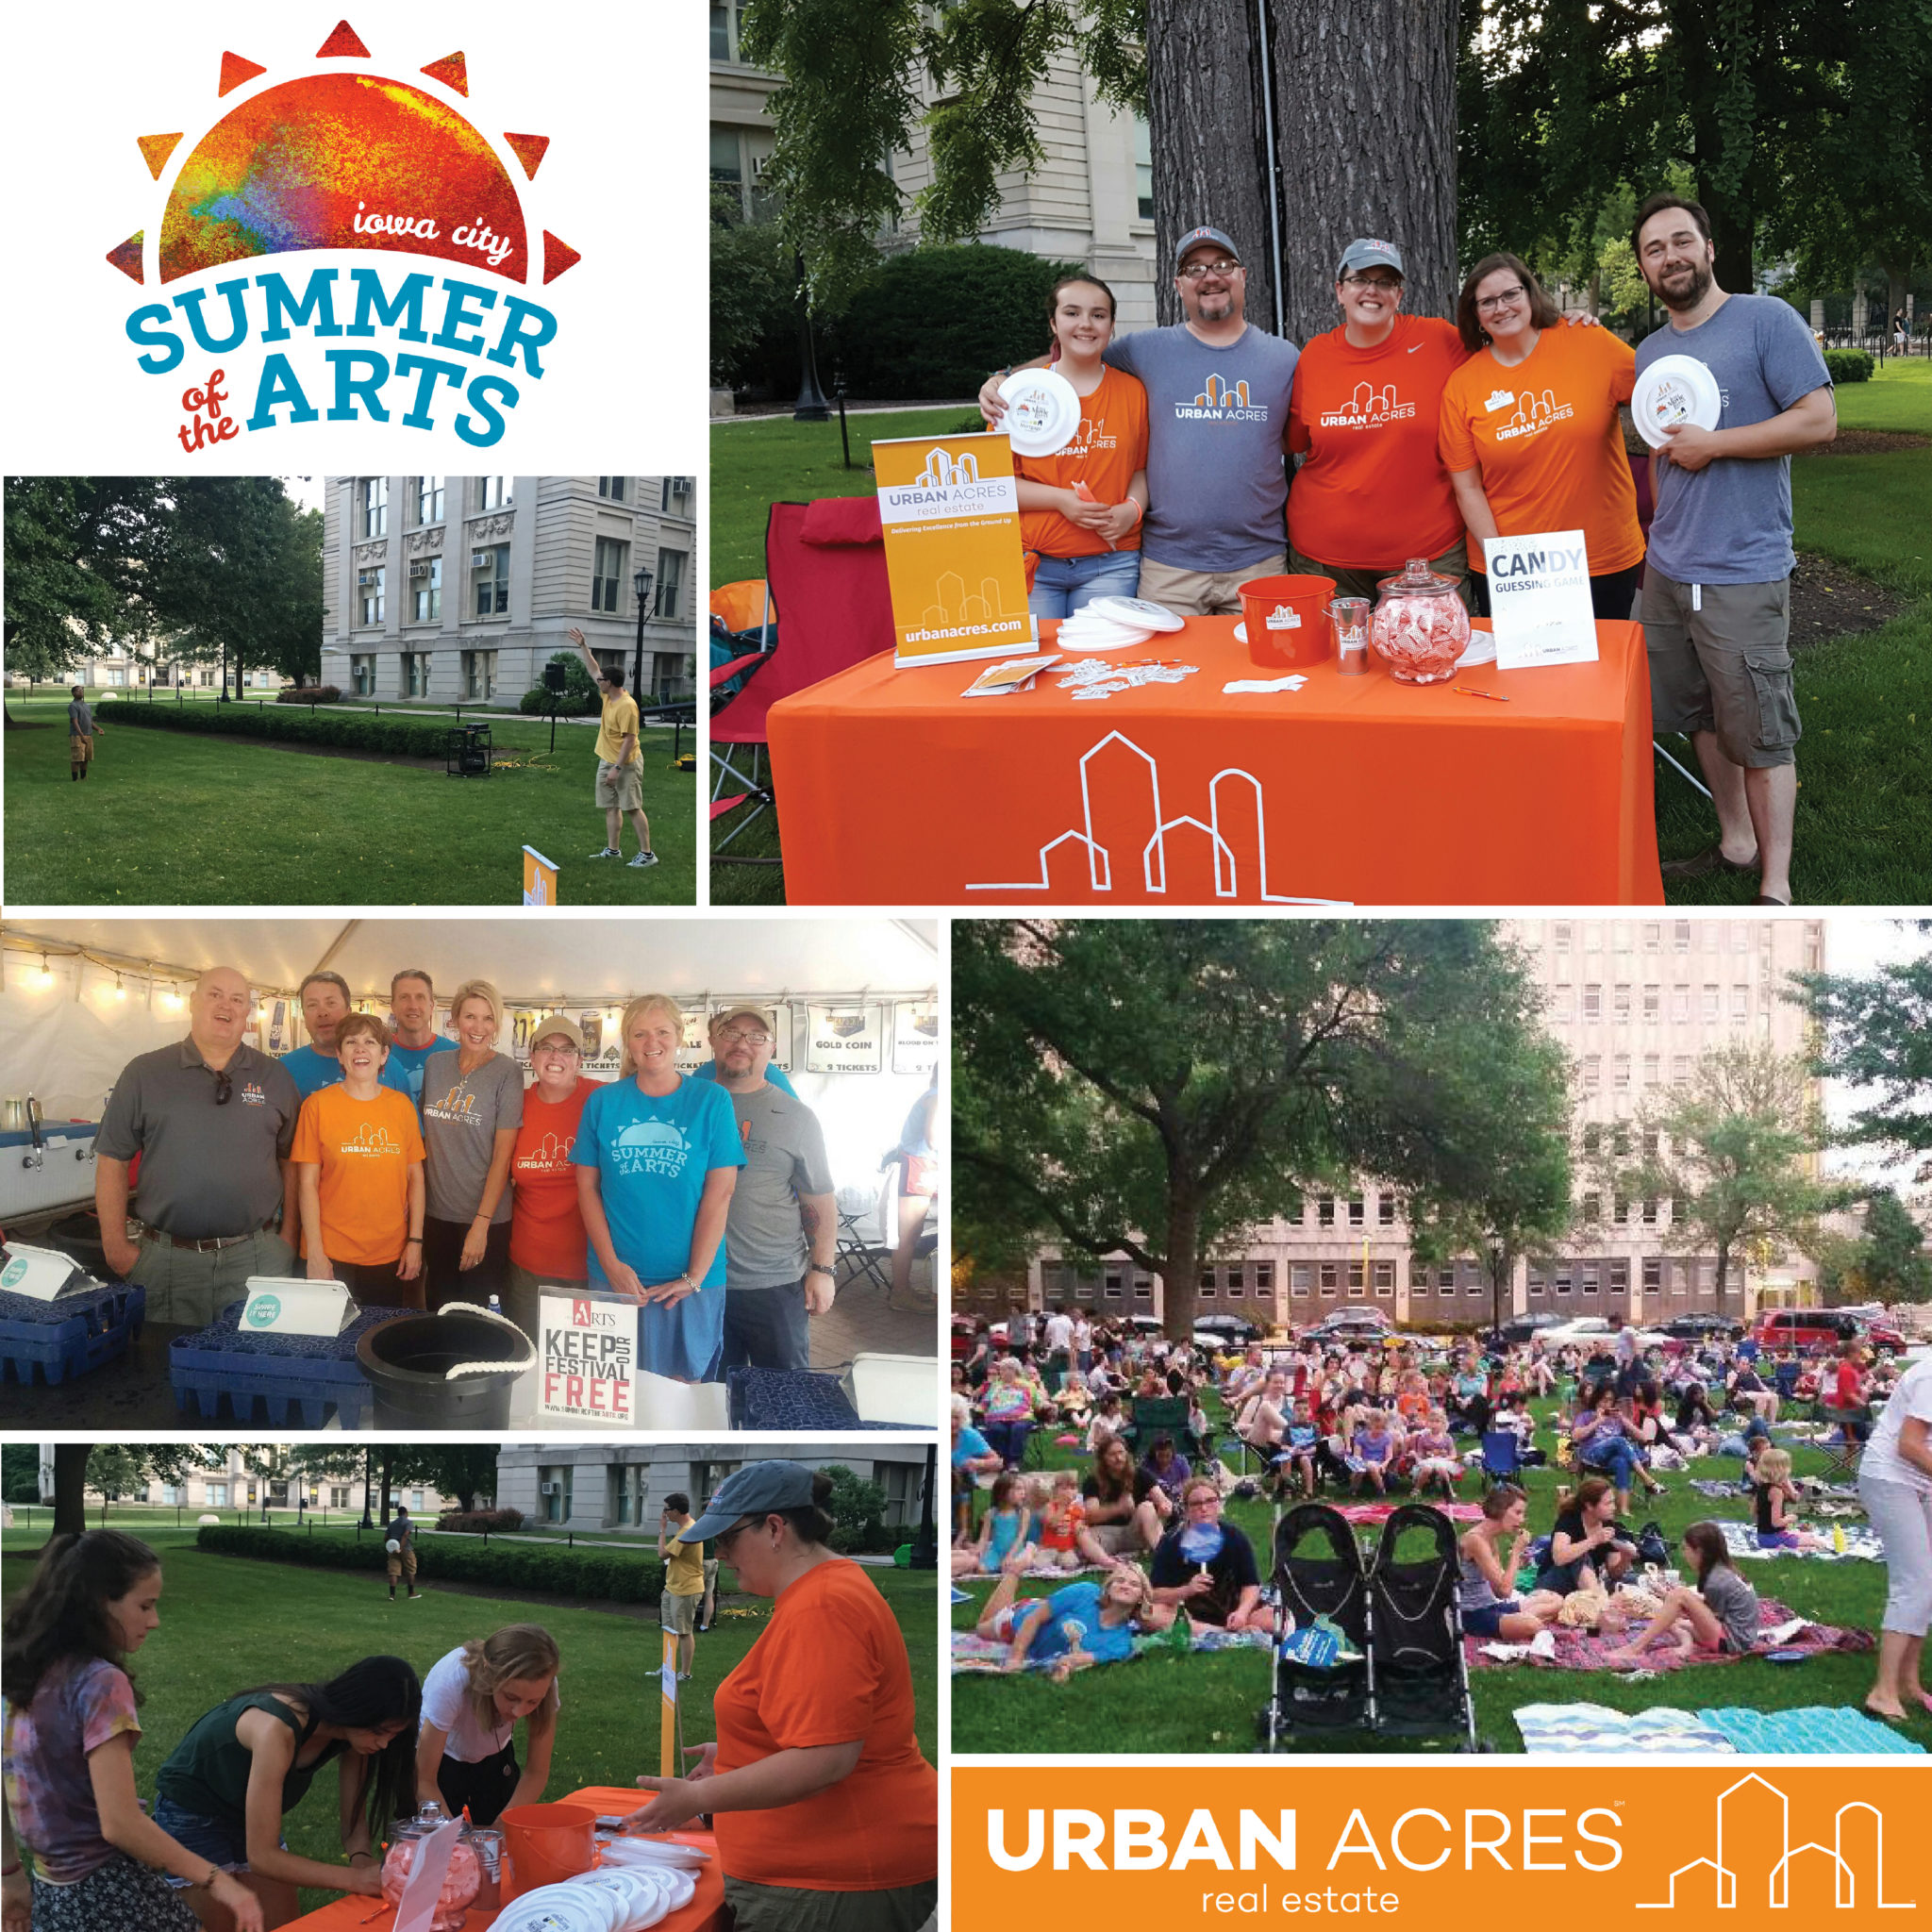 summer of the arts movie series - urban acres real estate